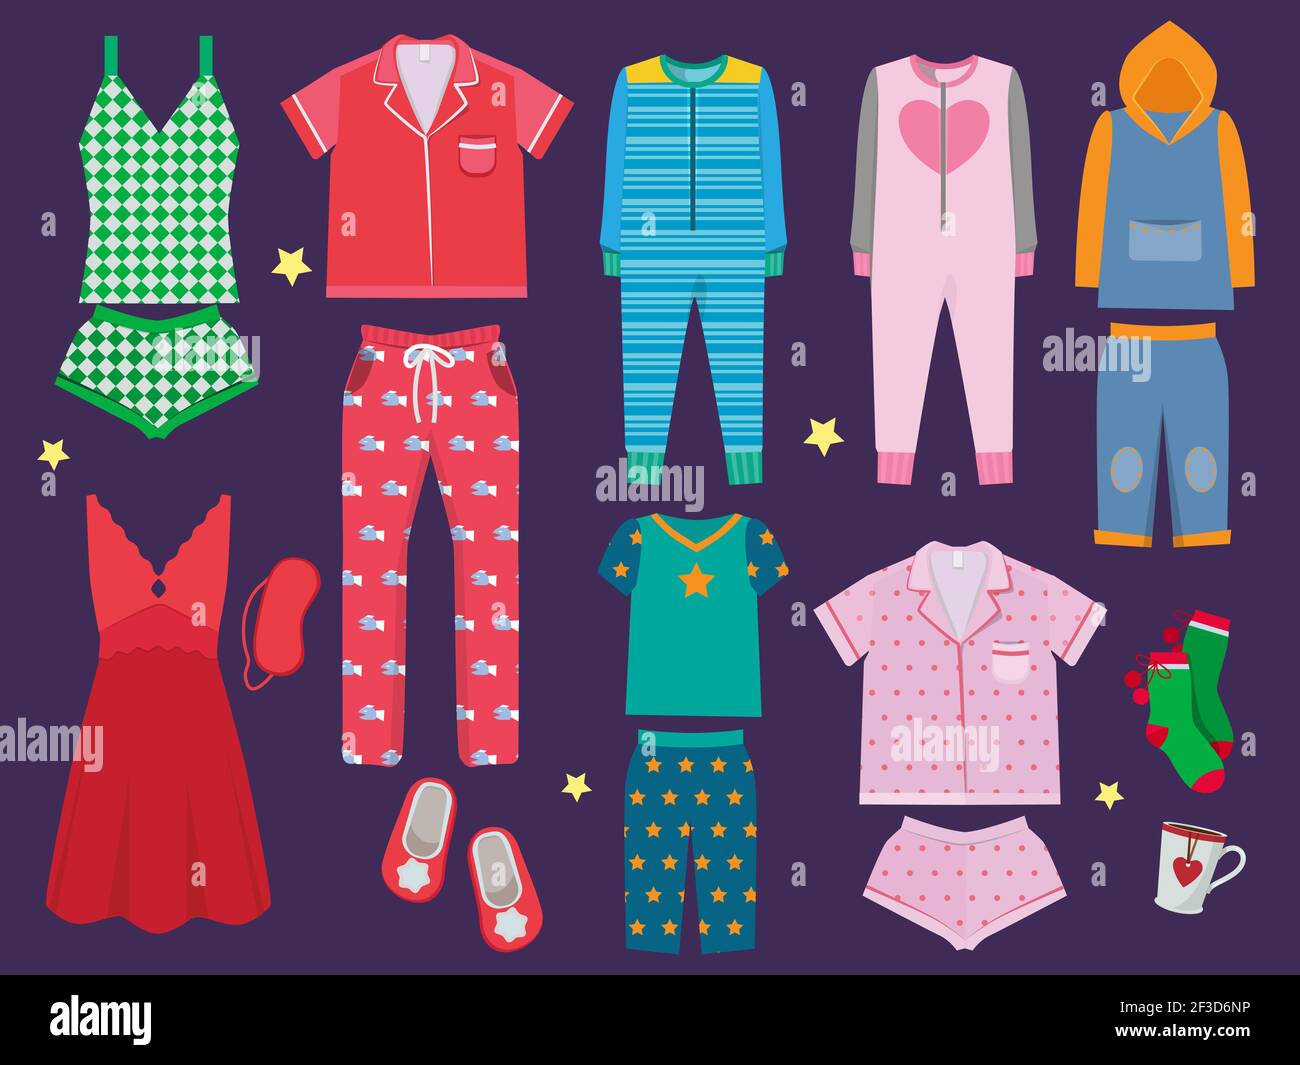 https://c8.alamy.com/comp/2F3D6NP/pajamas-set-sleeping-clothes-collection-for-children-and-adults-sleepwear-textile-vector-colored-cartoon-illustrations-2F3D6NP.jpg